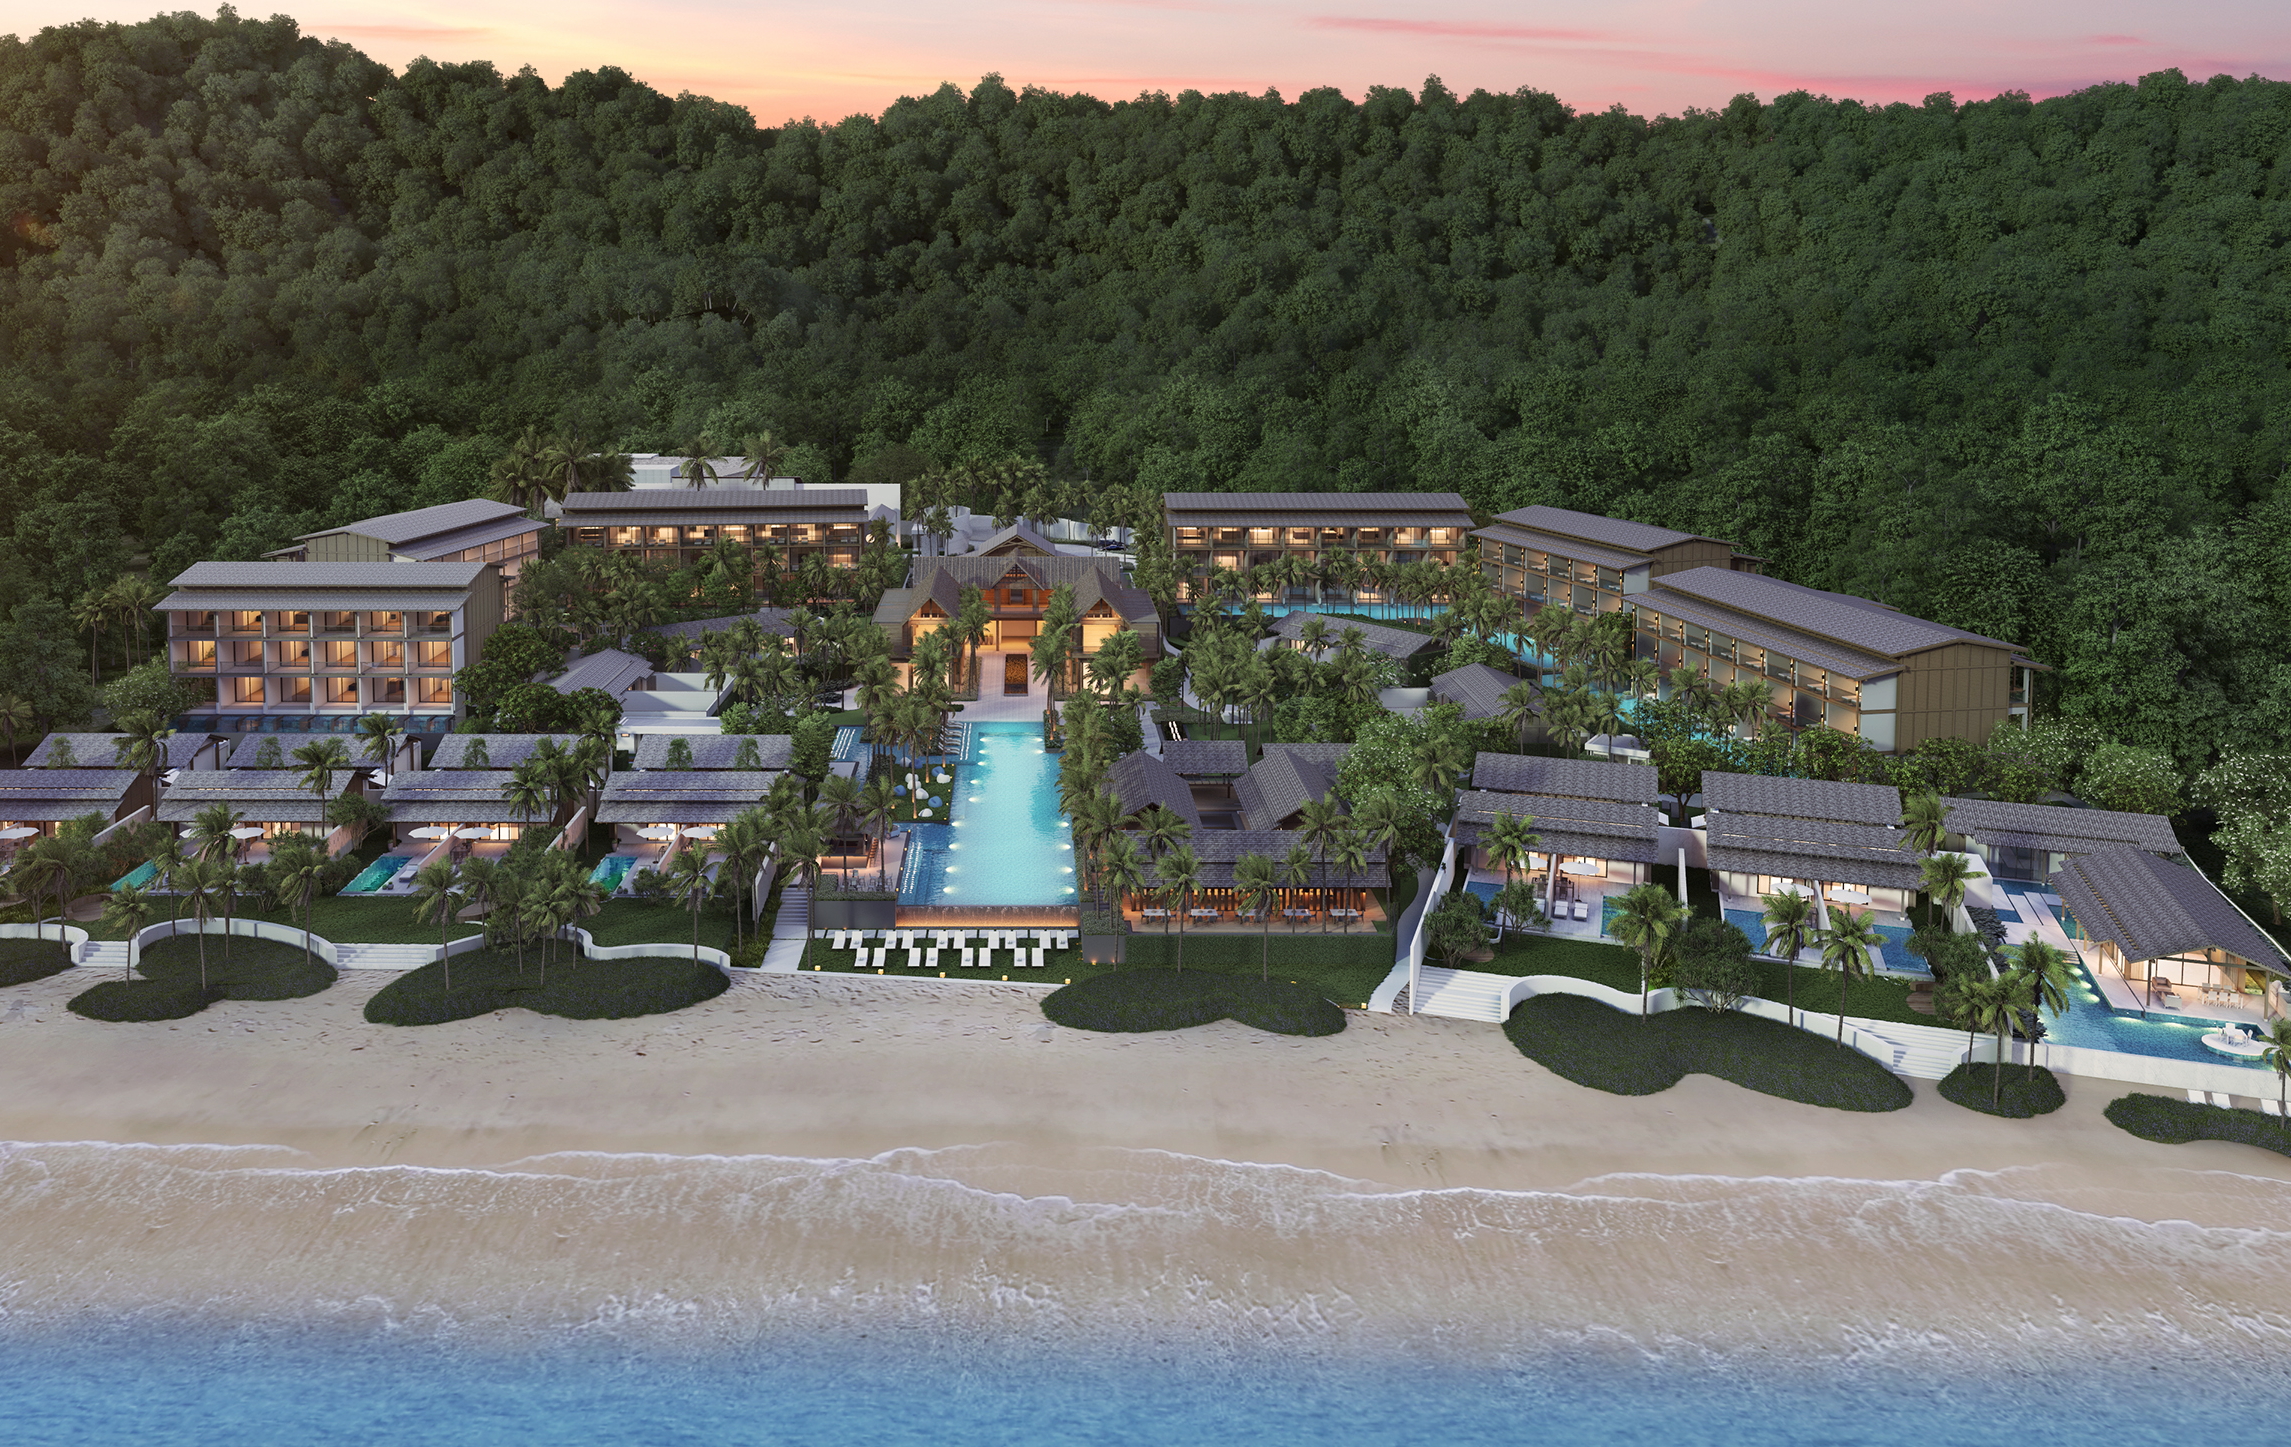 The 138-key Kimpton Koh Samui beachfront property will be located on Choengmon Beach, a short drive from Chaweng Beach, Fisherman’s Village in Bo Phut, and Koh Samui International Airport (USM). Click to enlarge.